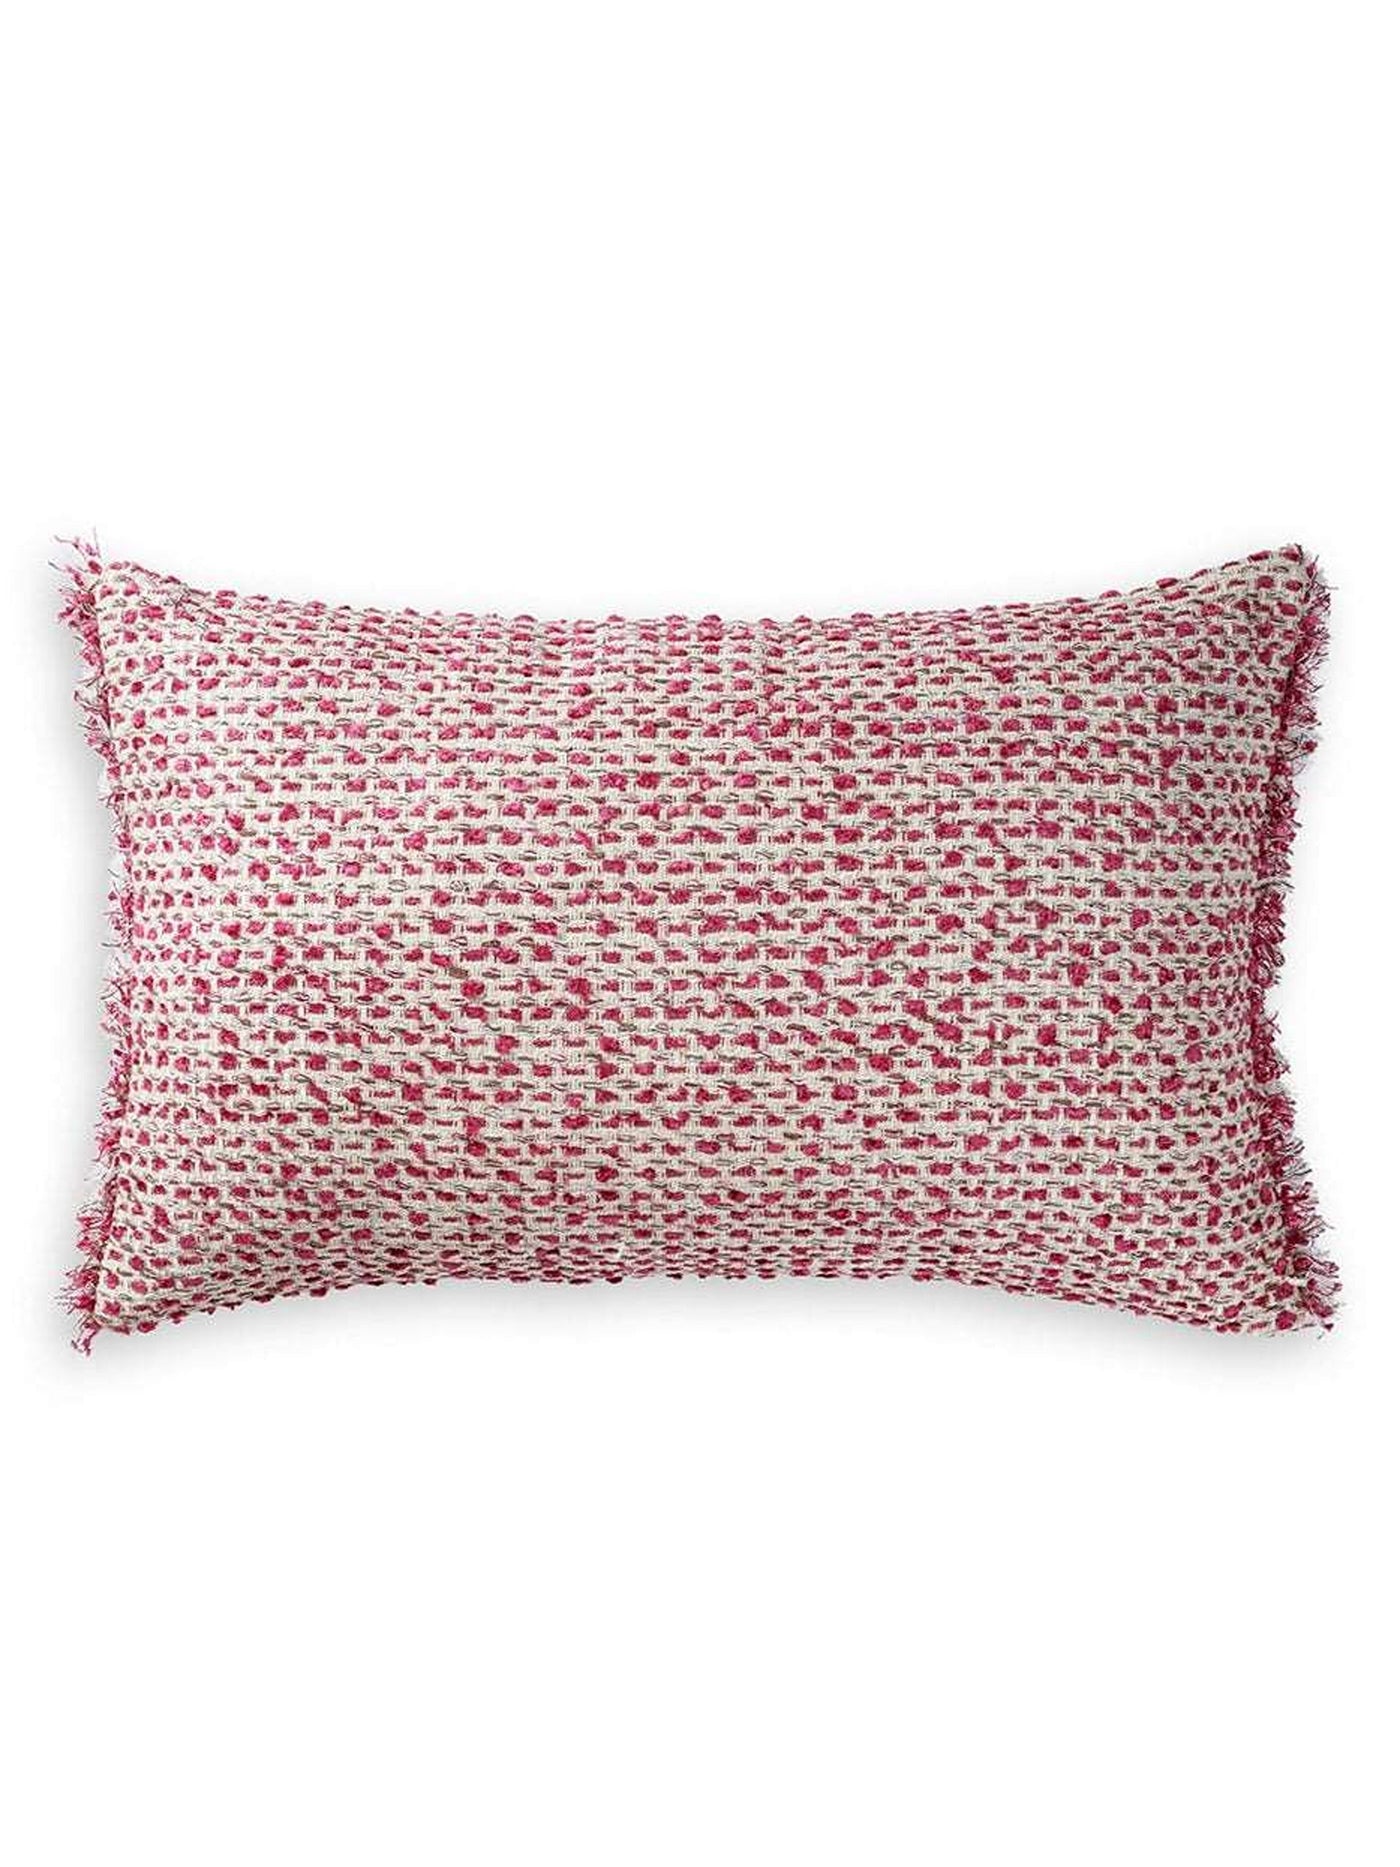 Flakes Cushion Cover Floral